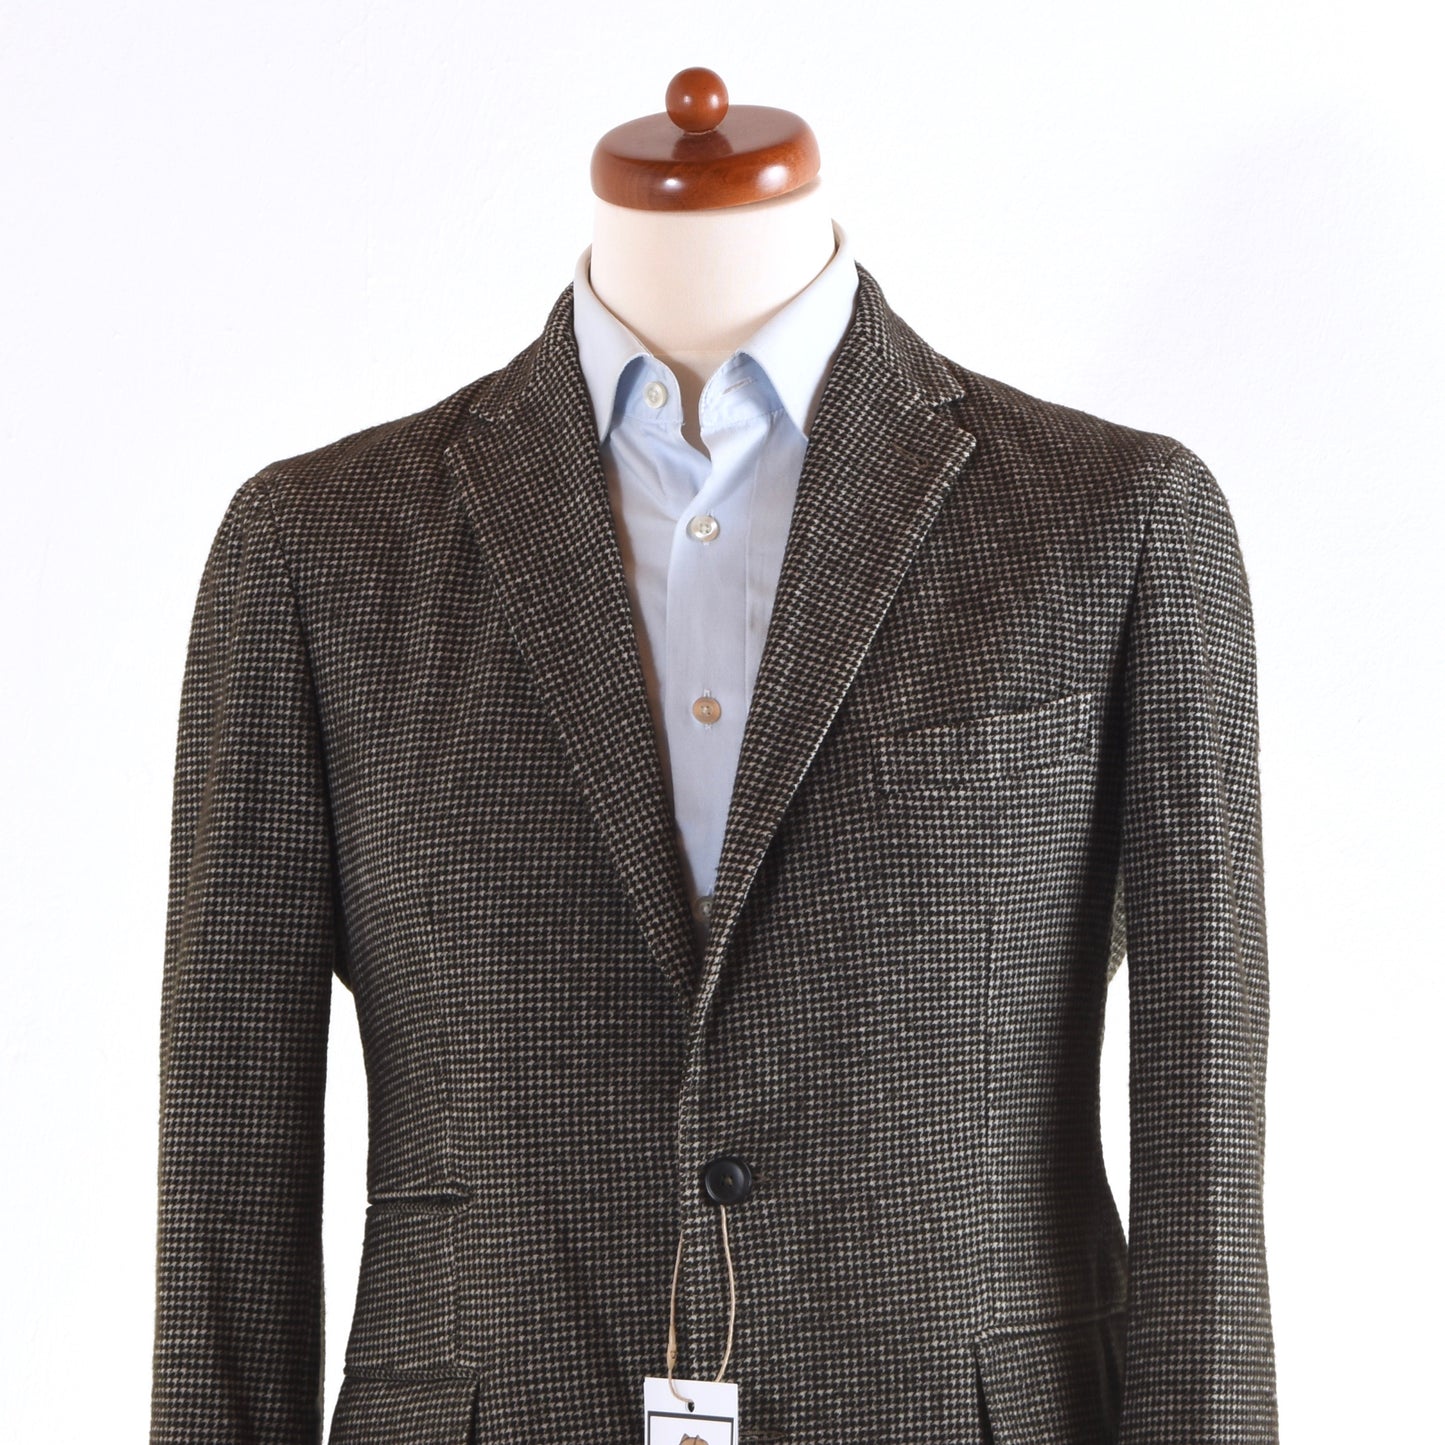 Tagliatore Unstructured Wool/Cotton Jacket Size 48 - Houndstooth